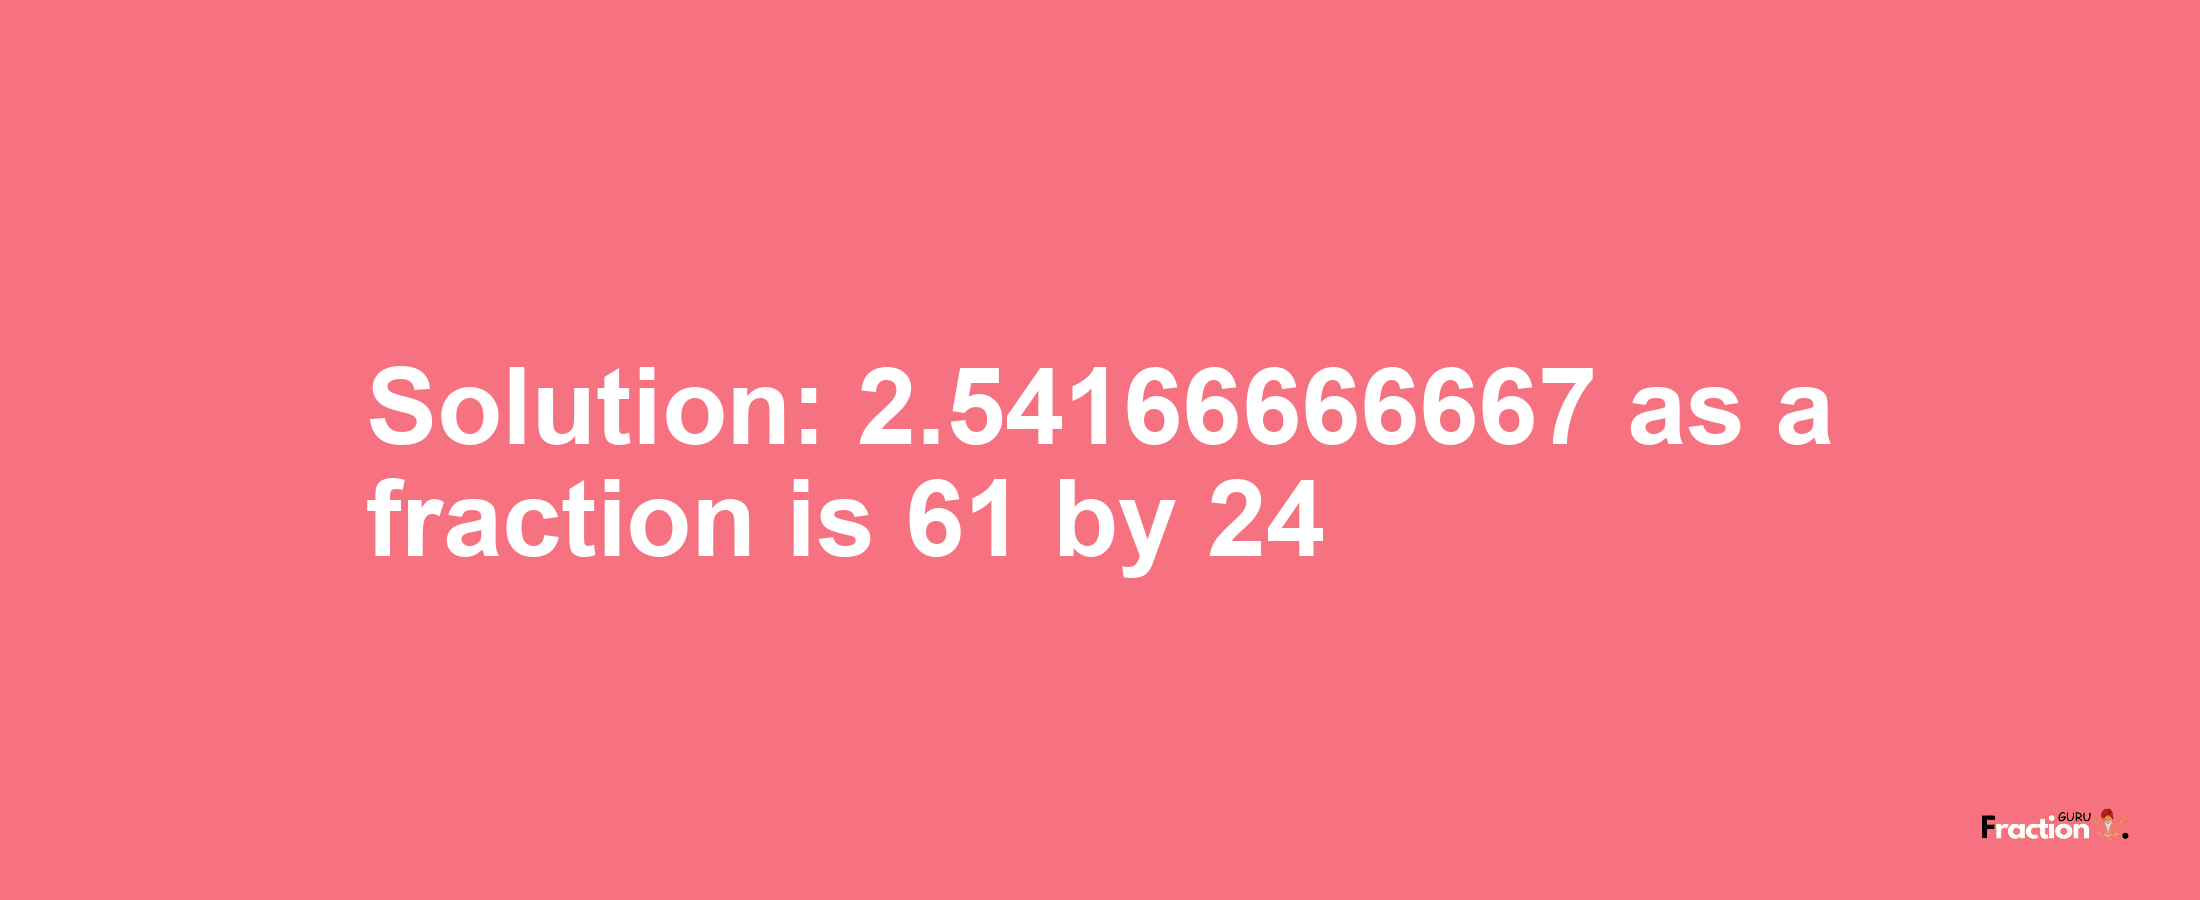 Solution:2.54166666667 as a fraction is 61/24